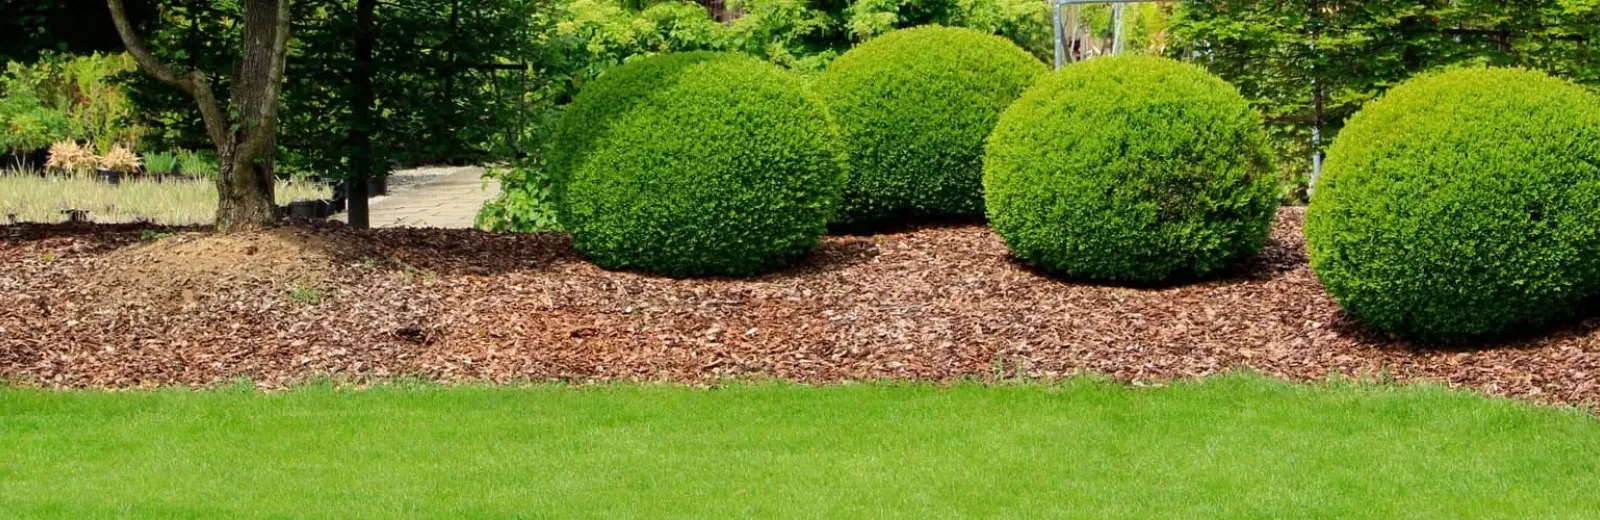 Healthy well maintained shrubs and lawn